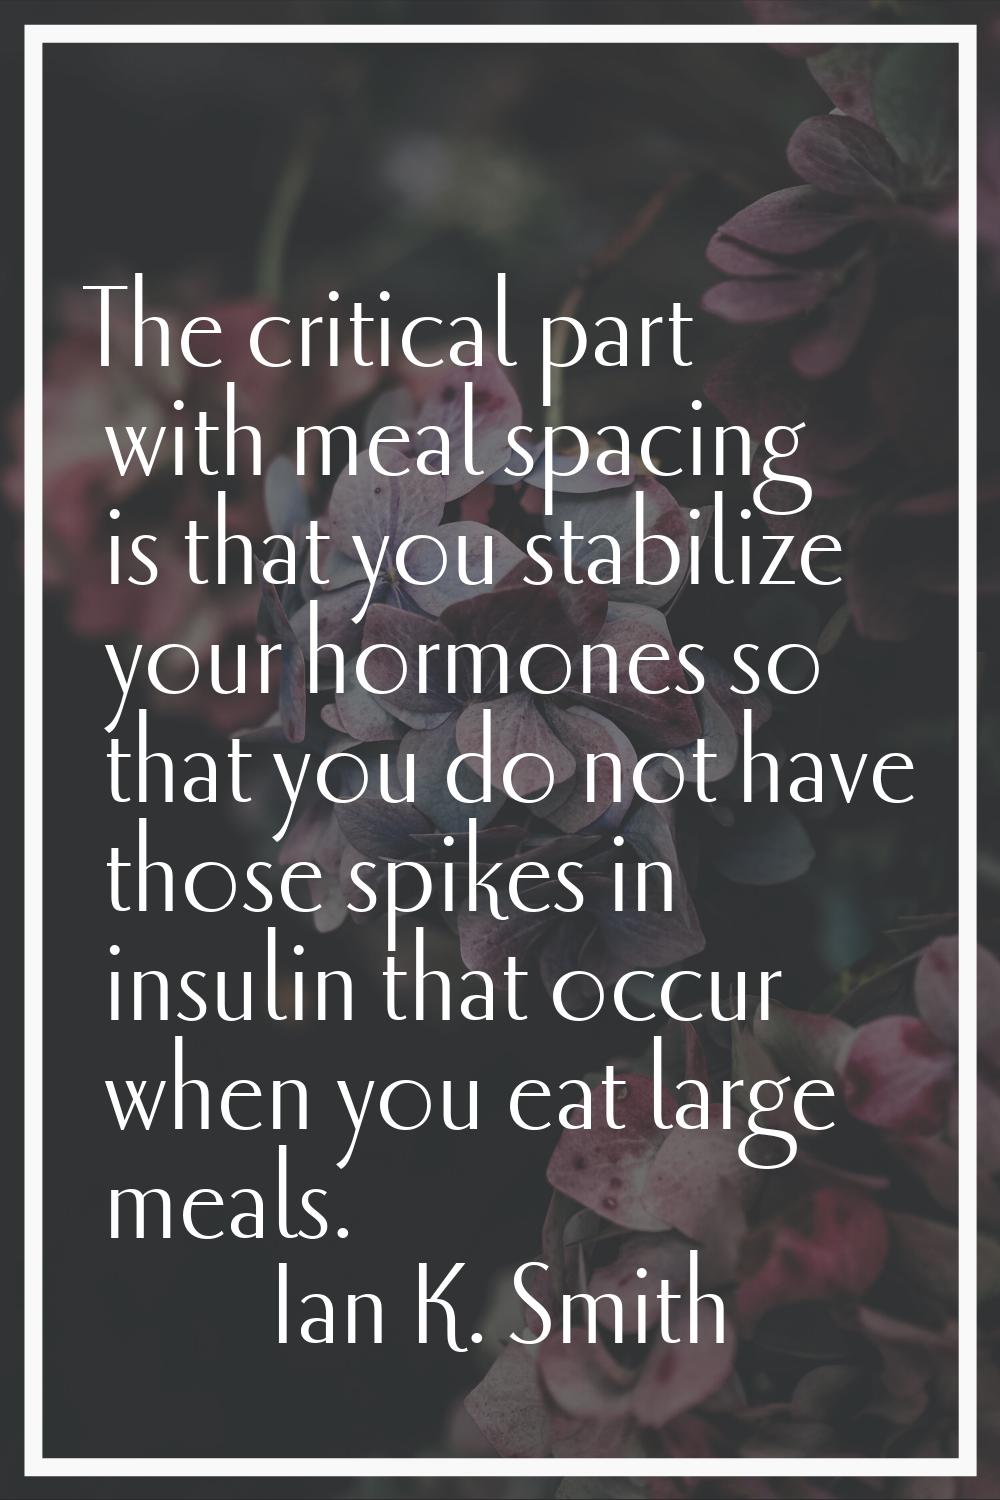 The critical part with meal spacing is that you stabilize your hormones so that you do not have tho